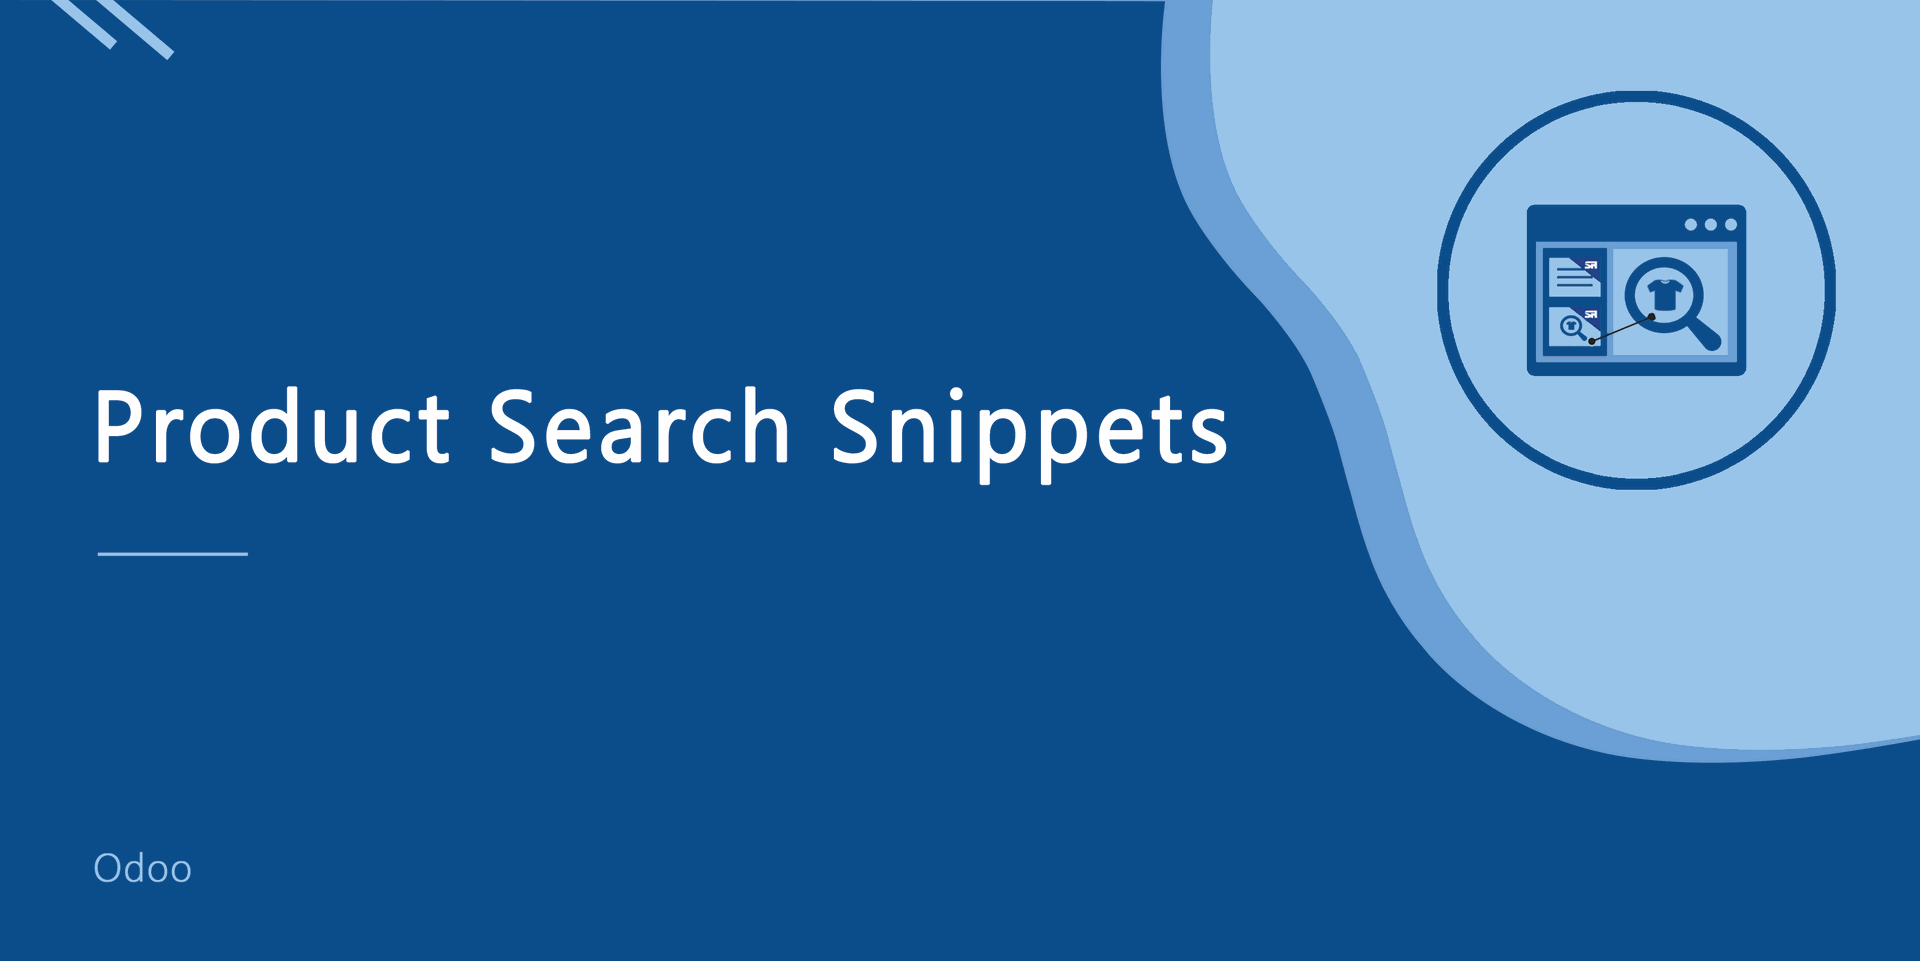 Product Search Snippets